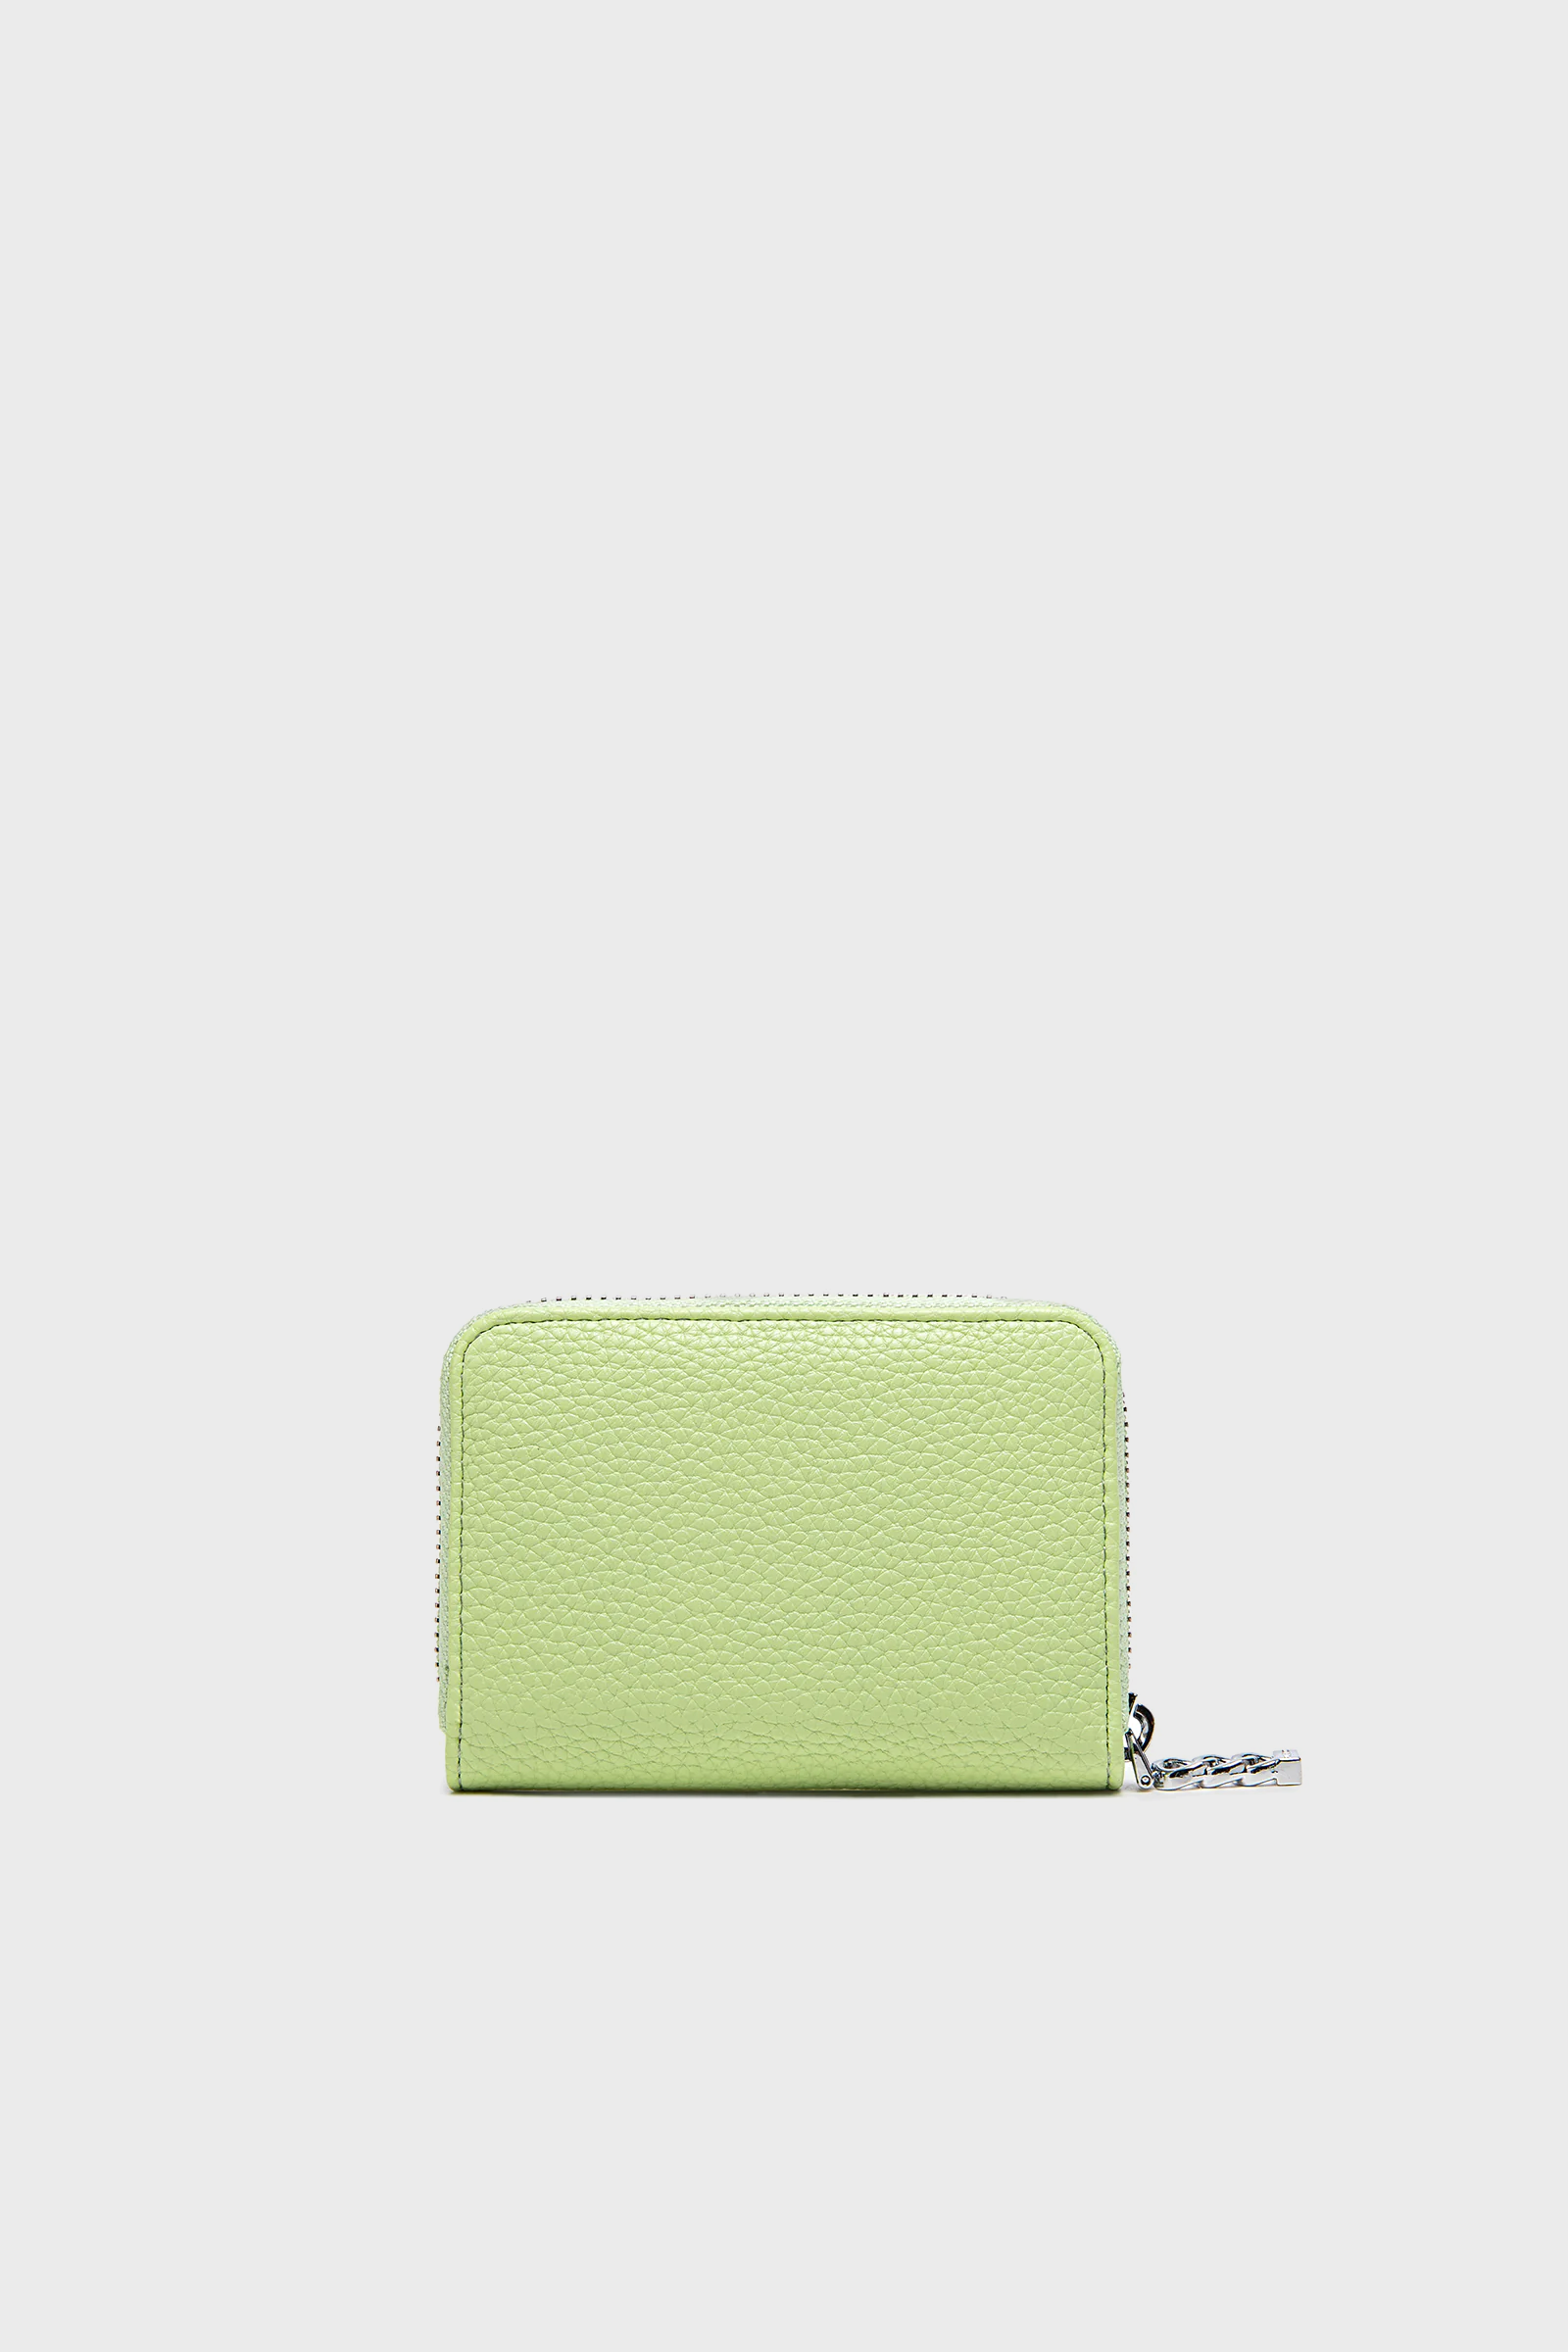 Pixie Mood Kimi Card Wallet in Lime Pebbled